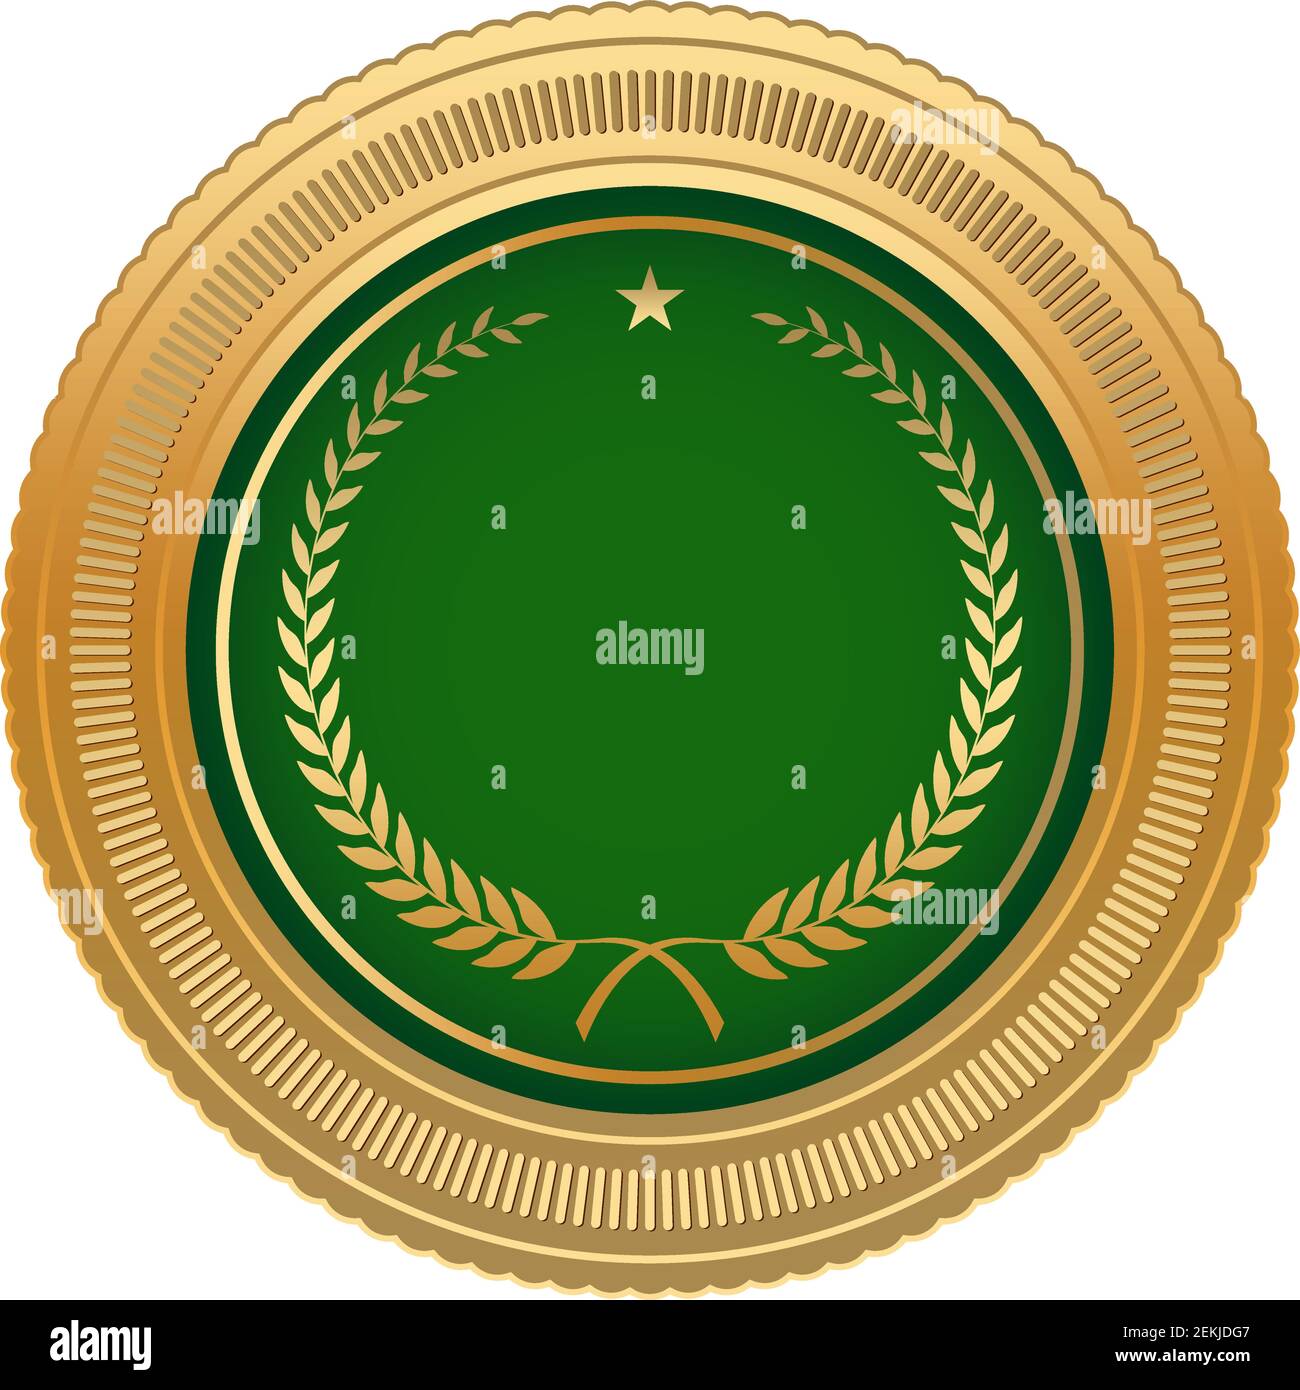 Medal Award vector with gold frame and green medal on white isolated back. Vector Illustration with gold frame, laurel wreath, star and green medal. Stock Vector